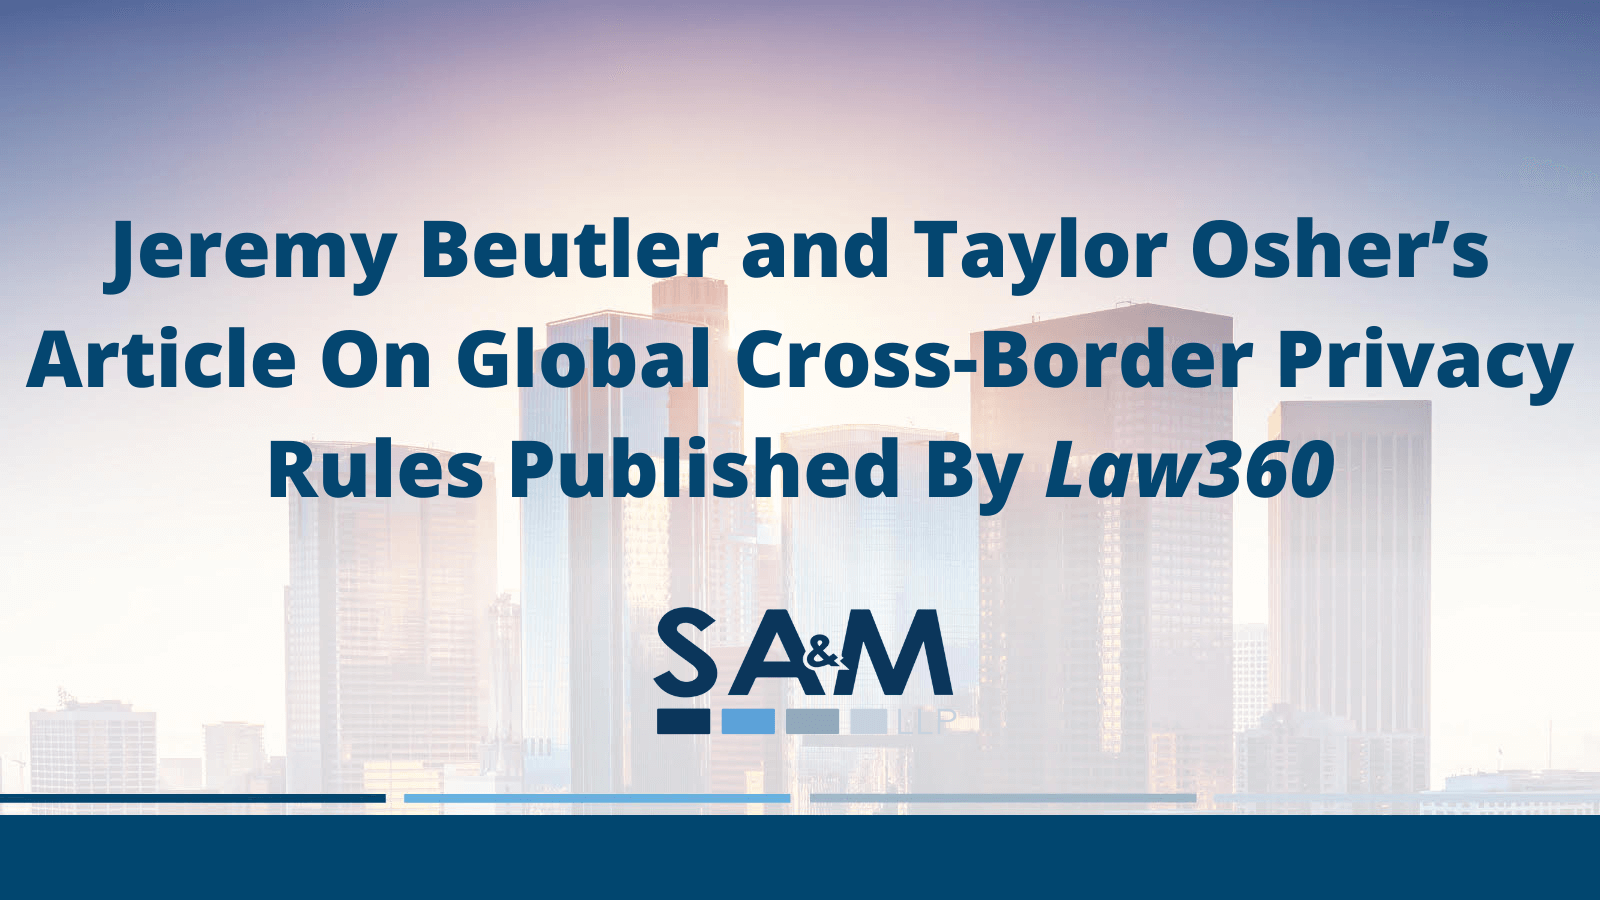 Jeremy Beutler and Taylor Osher’s Article On Global Cross-Border Privacy Rules Published By Law360